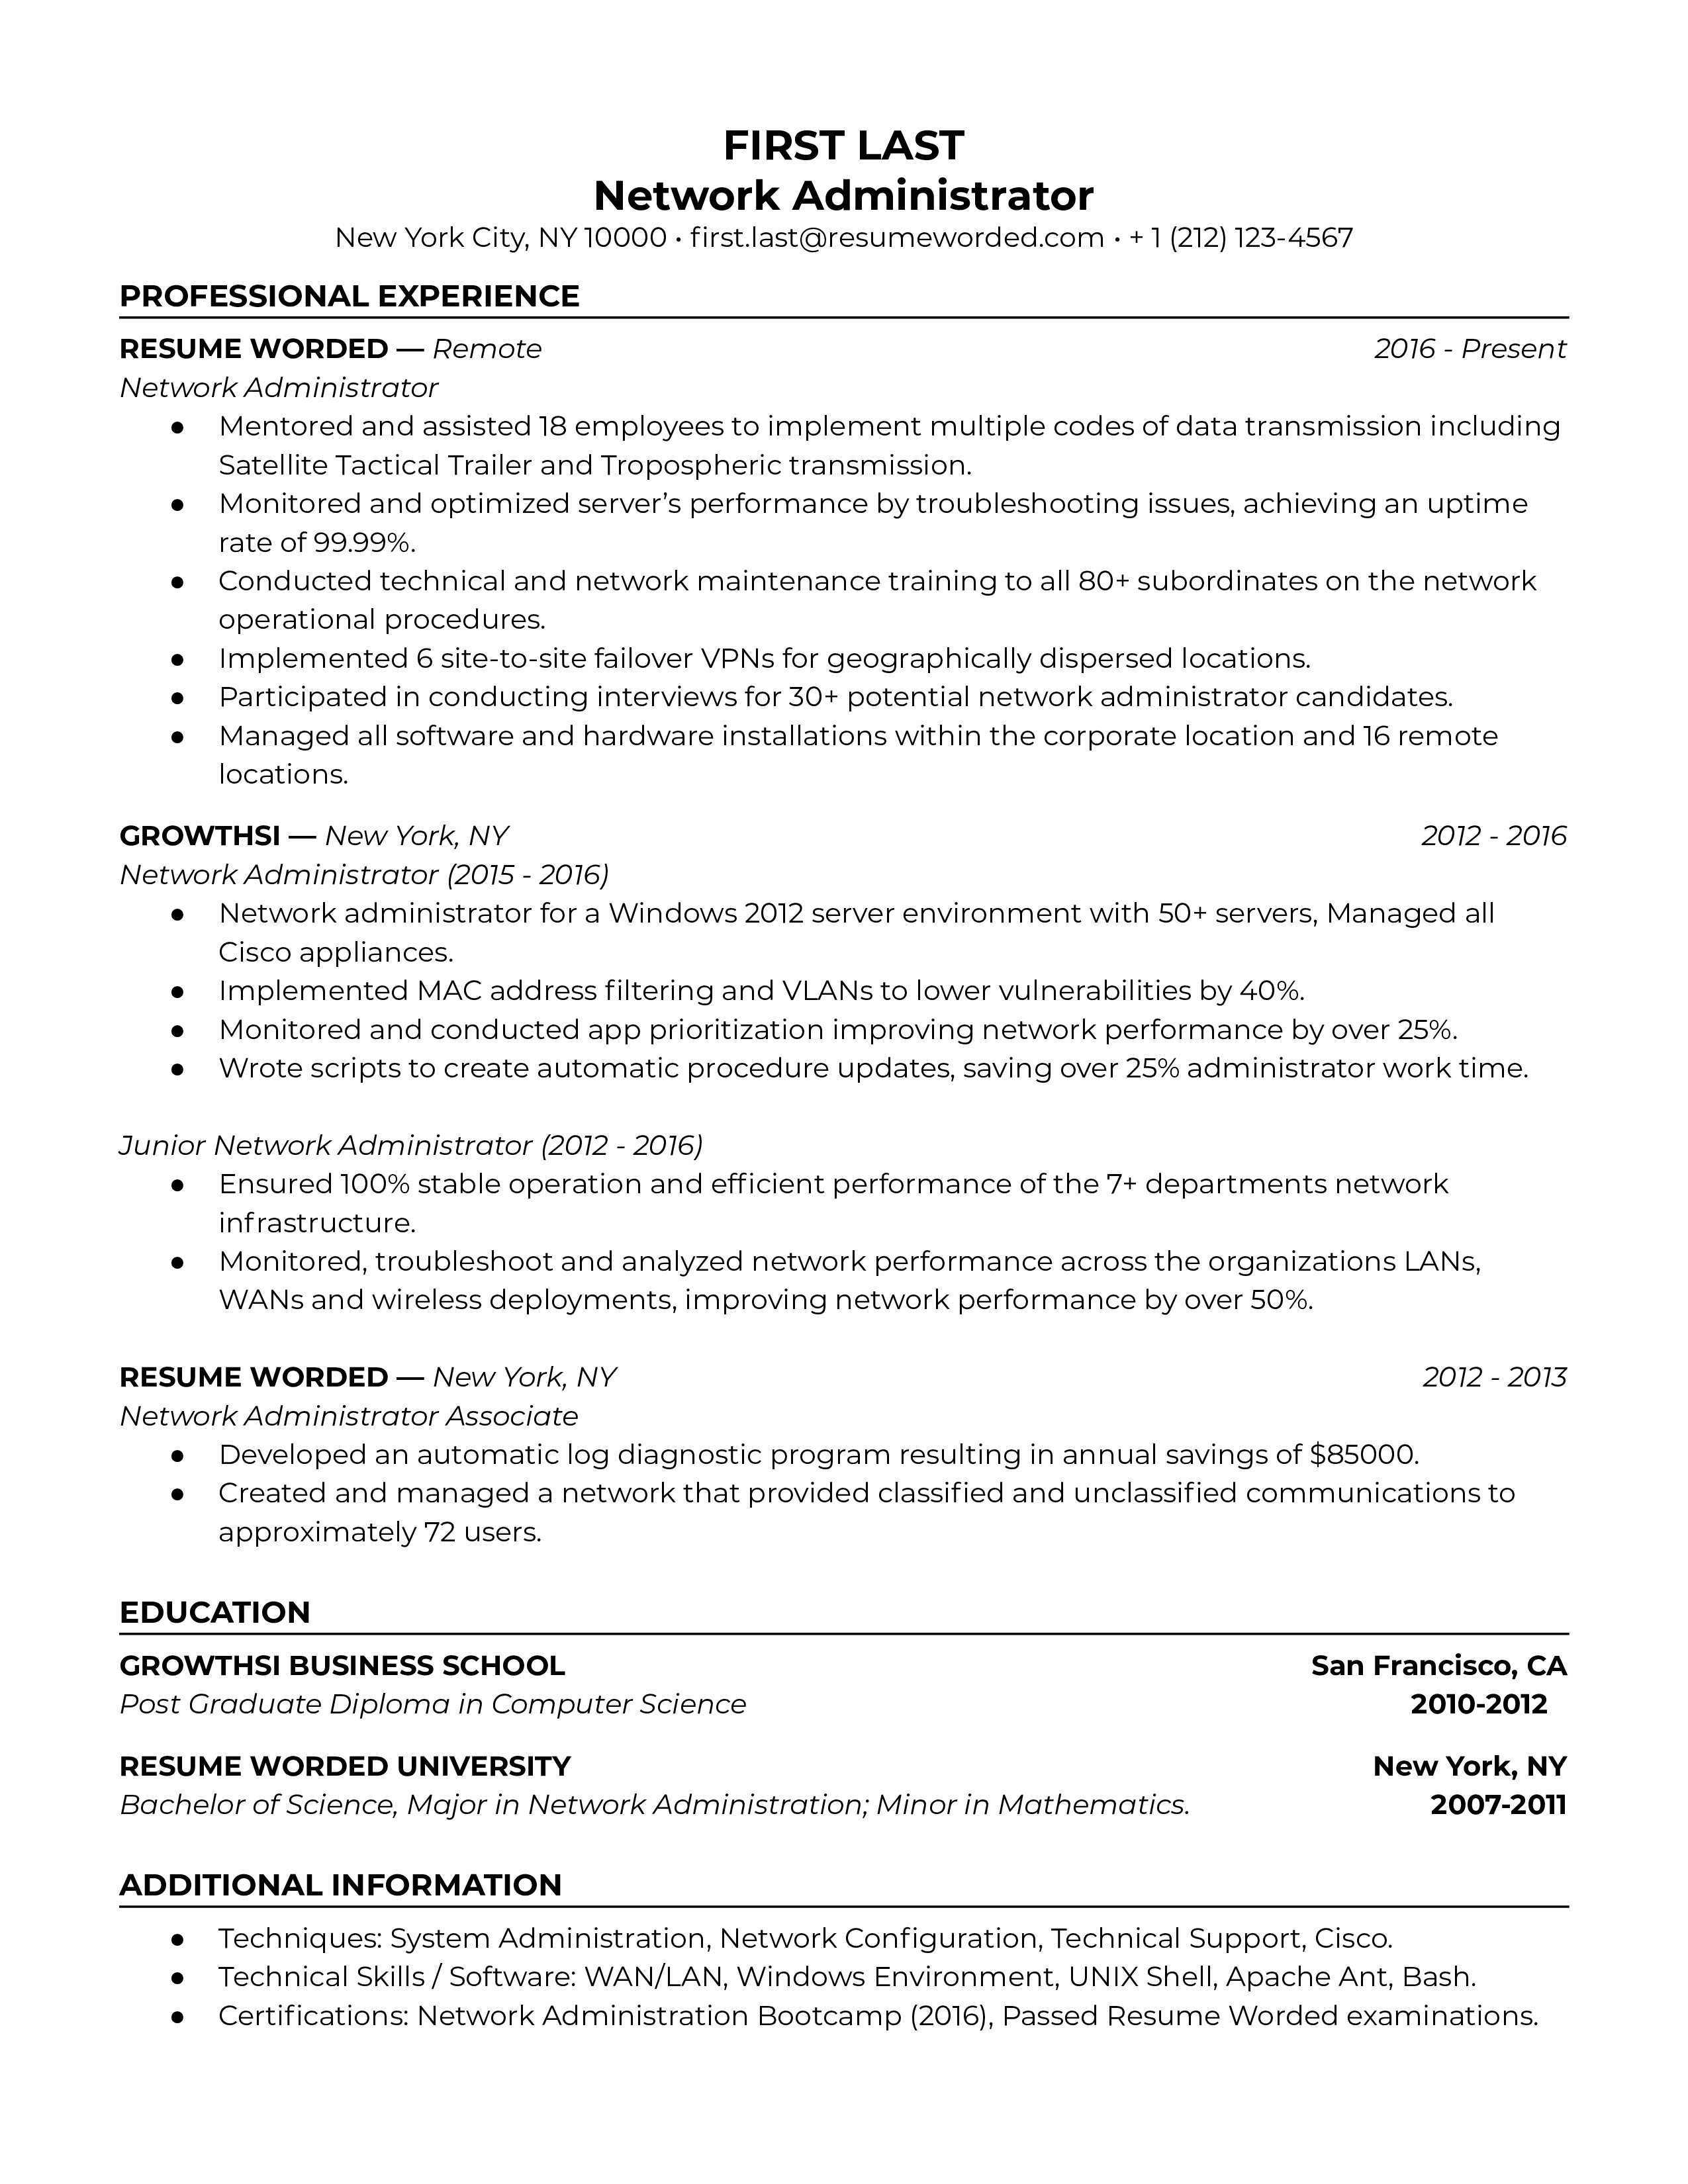 An example of a Network Administrator resume showcasing technical skills and project-based accomplishments.